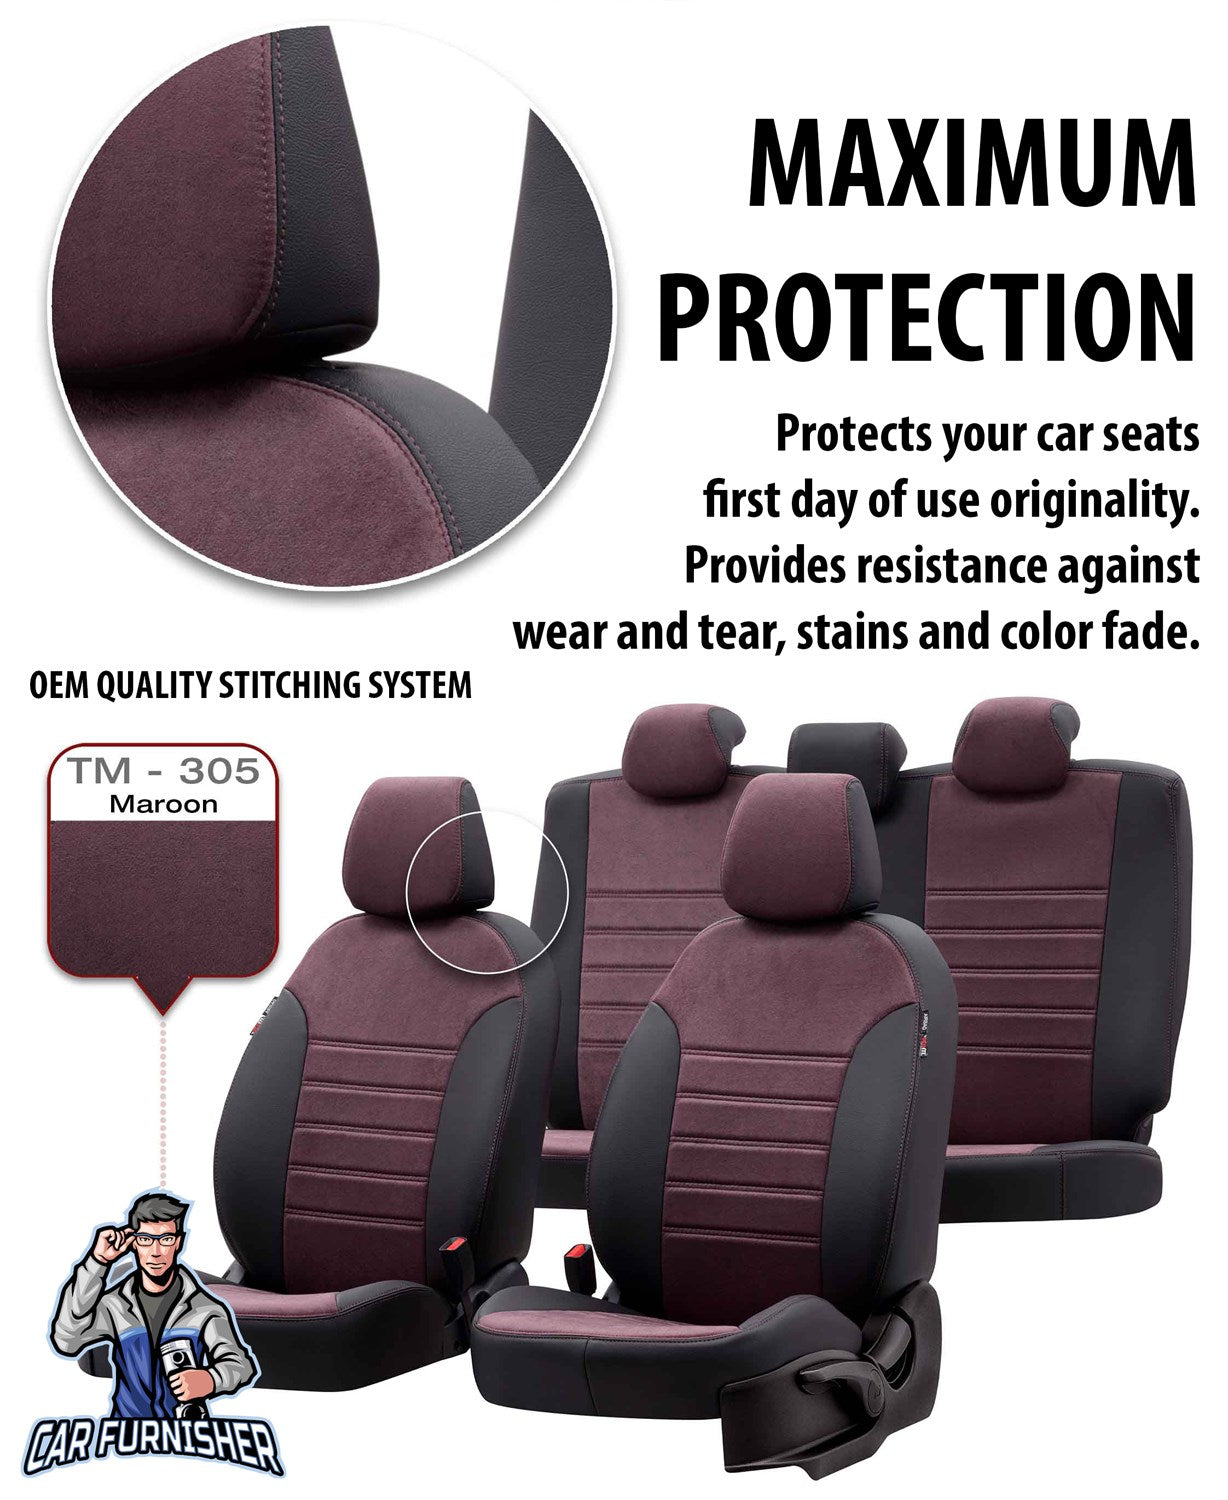 Seat Toledo Seat Covers Milano Suede Design Burgundy Leather & Suede Fabric